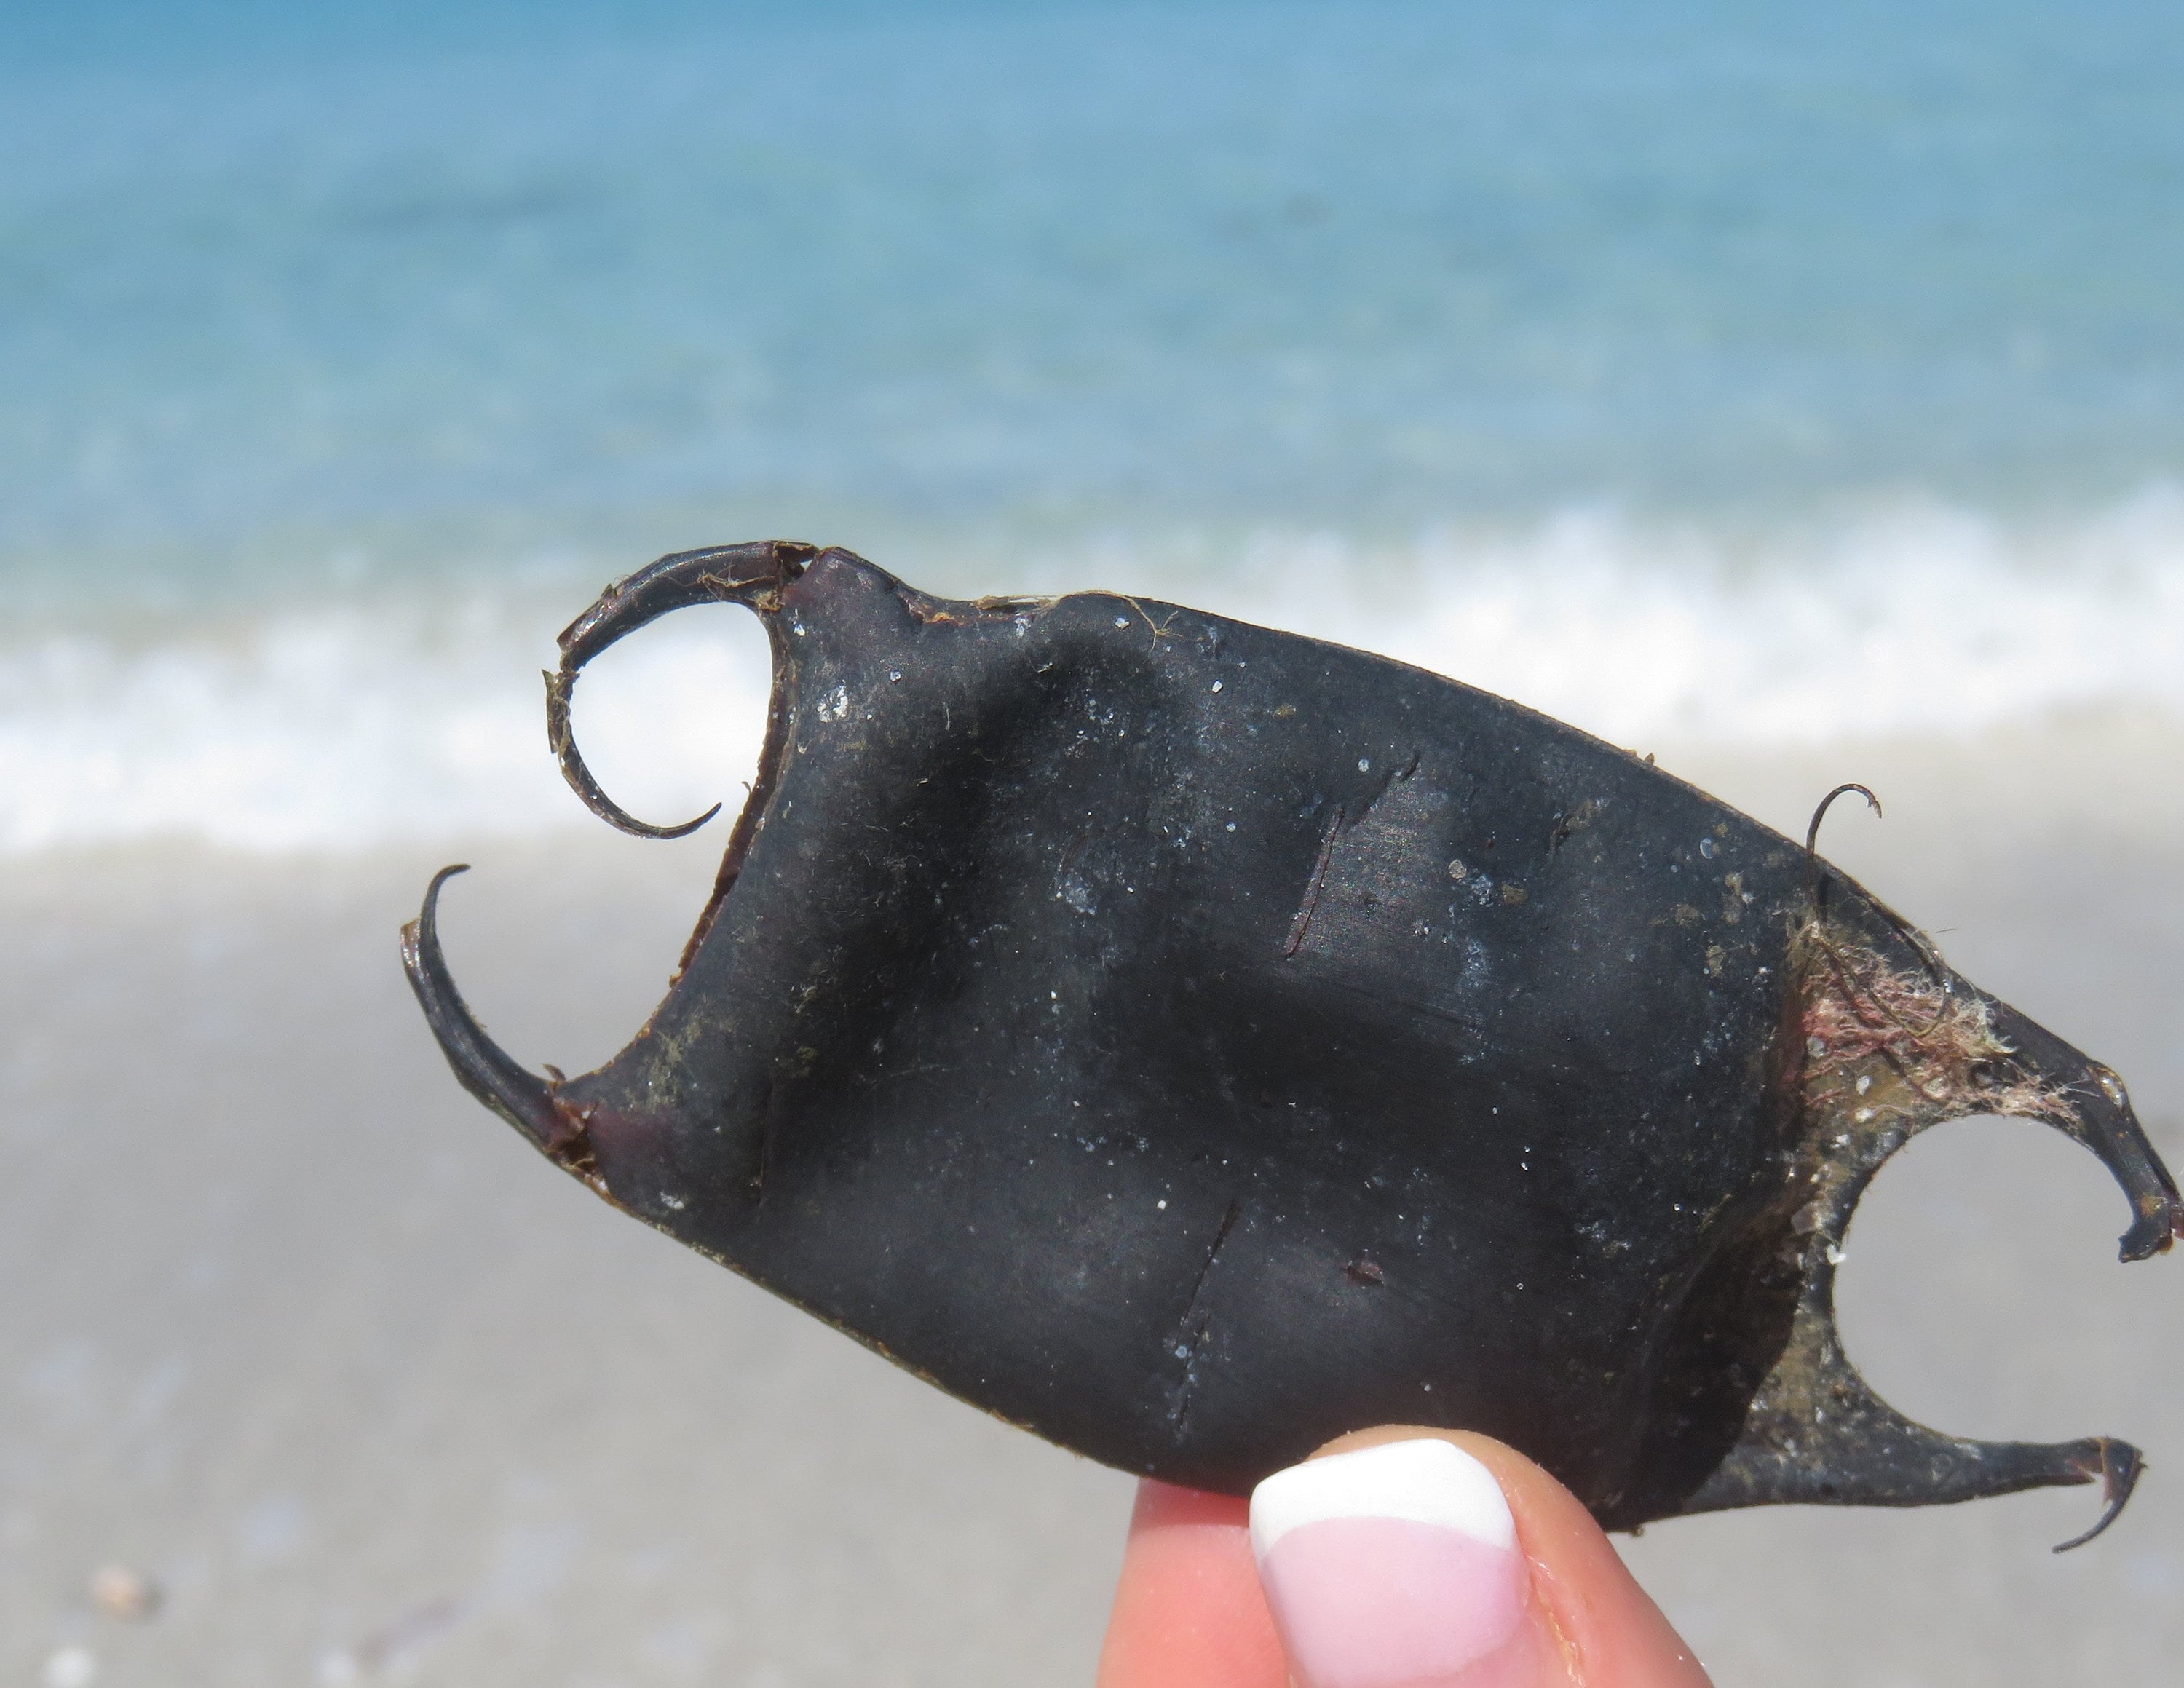 A mermaid's purse opens to reveal ... a baby cat shark